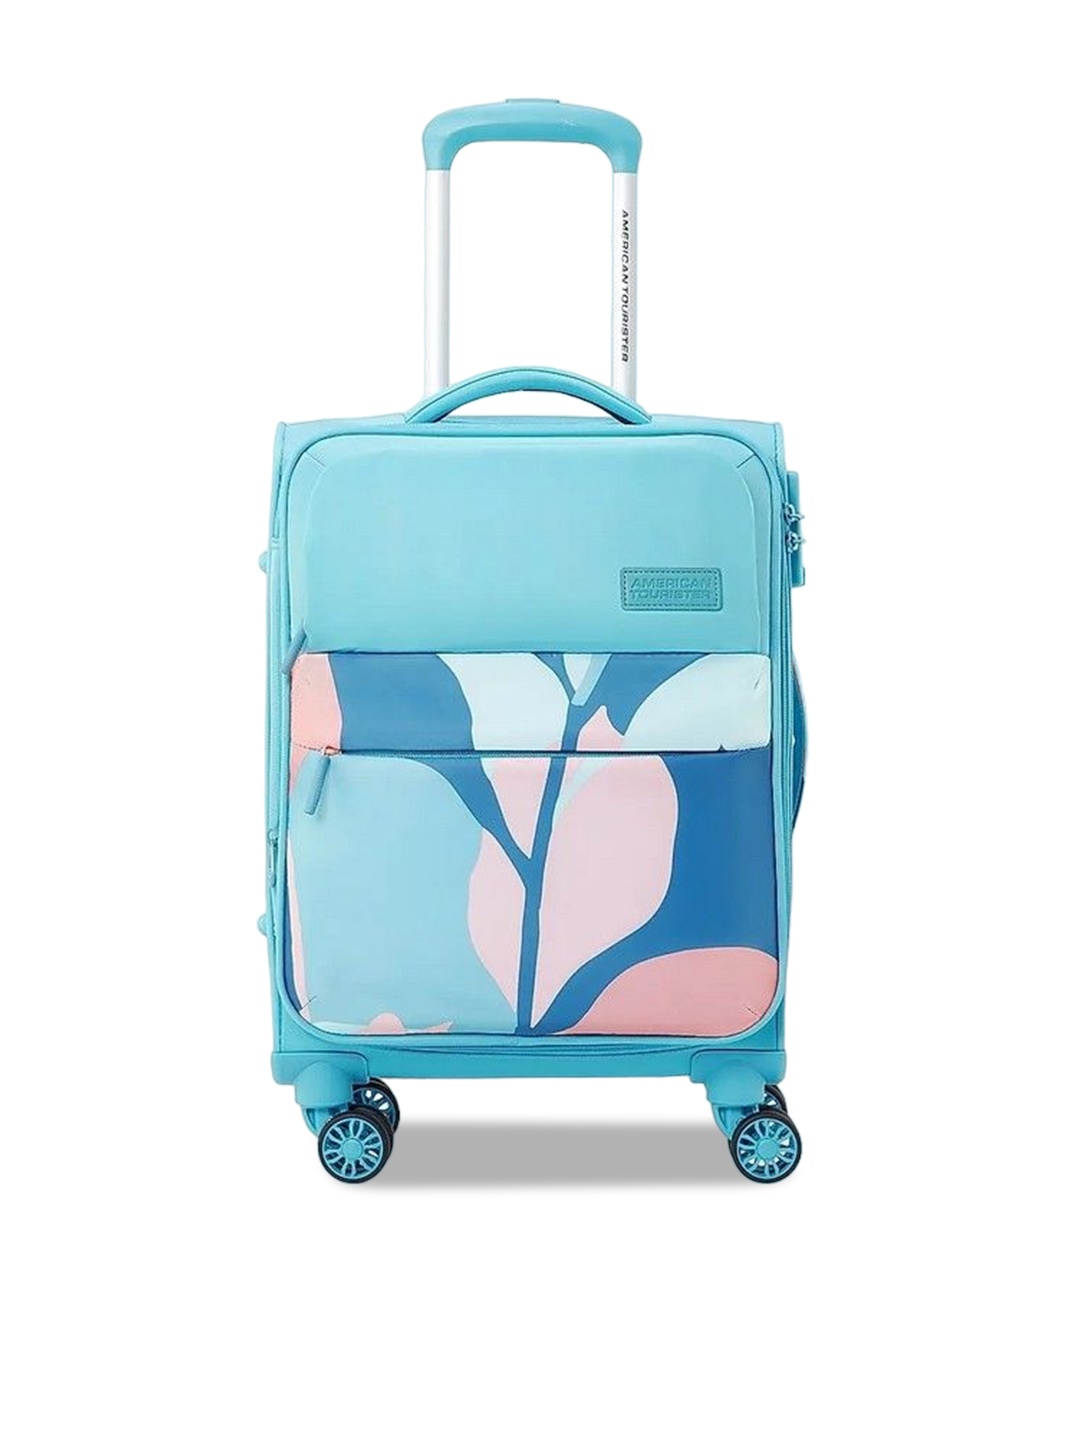 

AMERICAN TOURISTER Printed Soft-Sided Large Trolley Suitcase, Blue